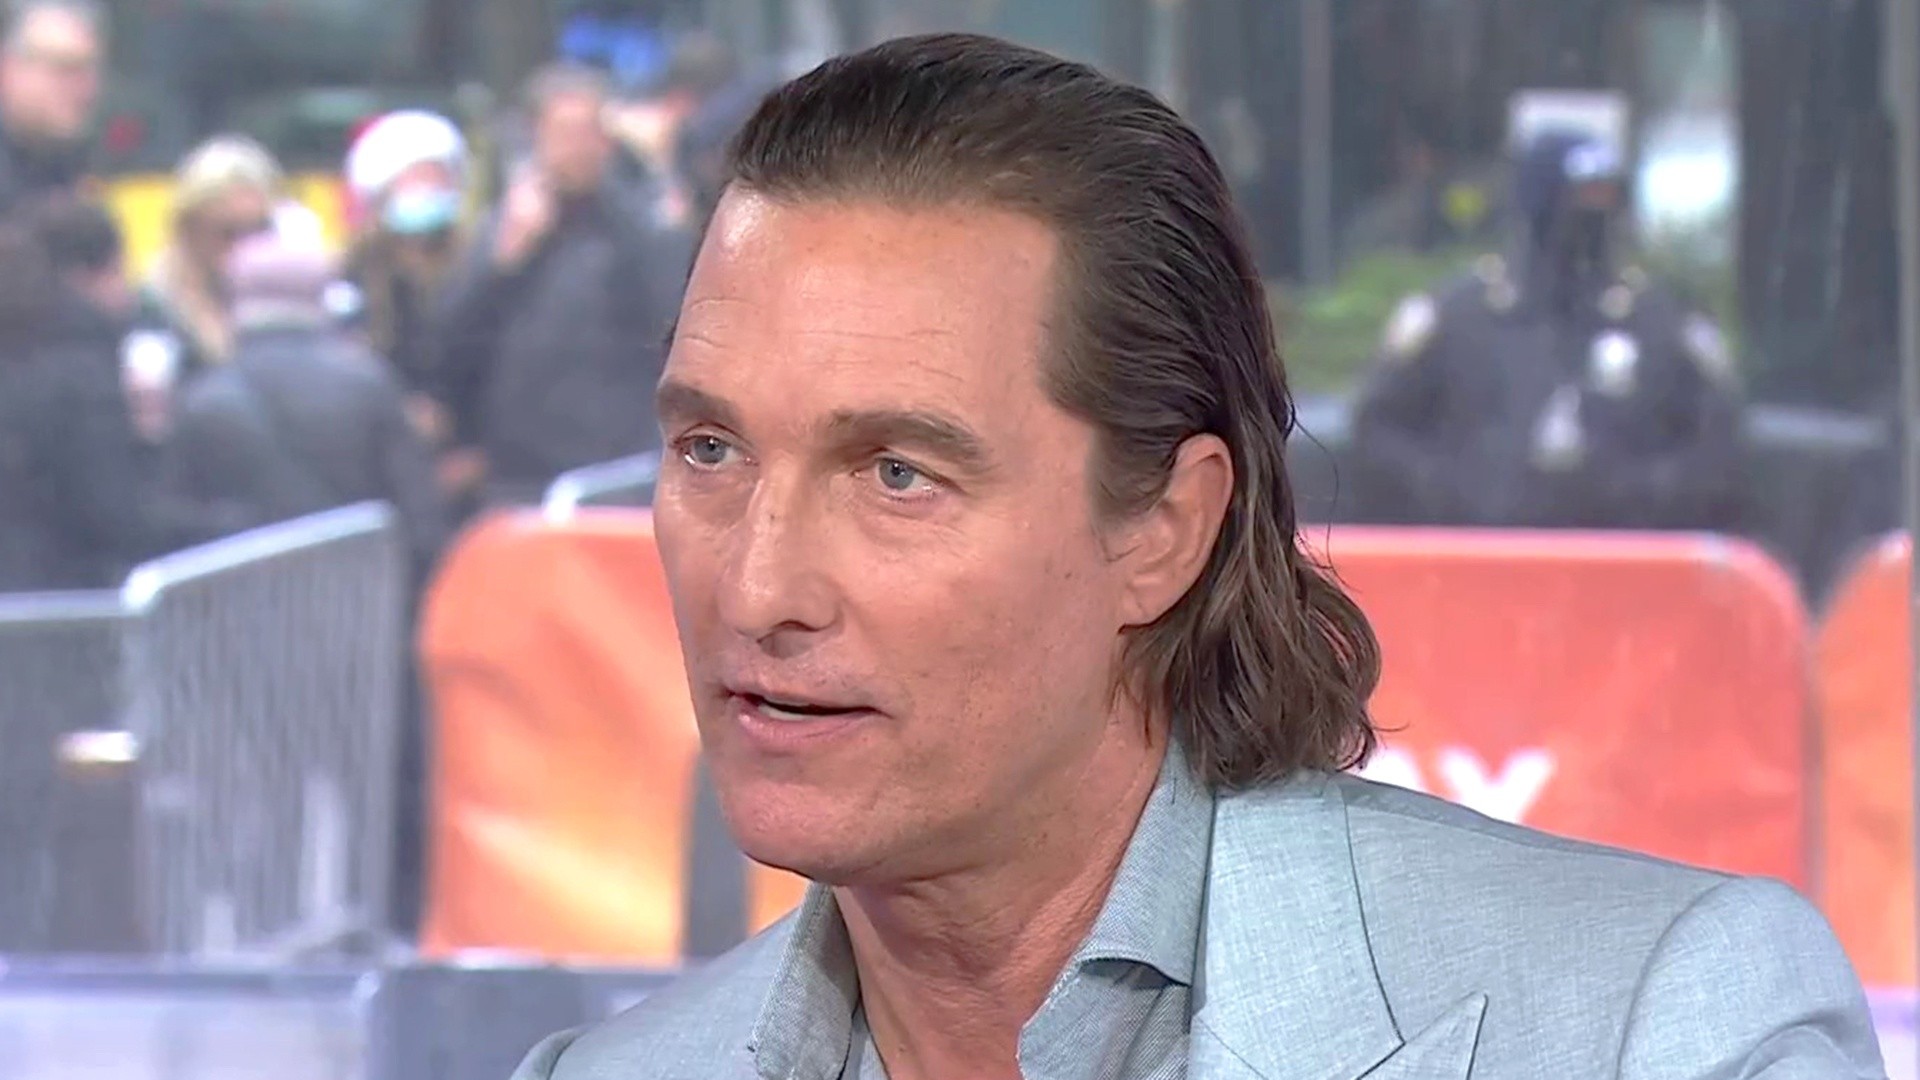 Matthew McConaughey: 'I'm not going to say no forever' to running for office